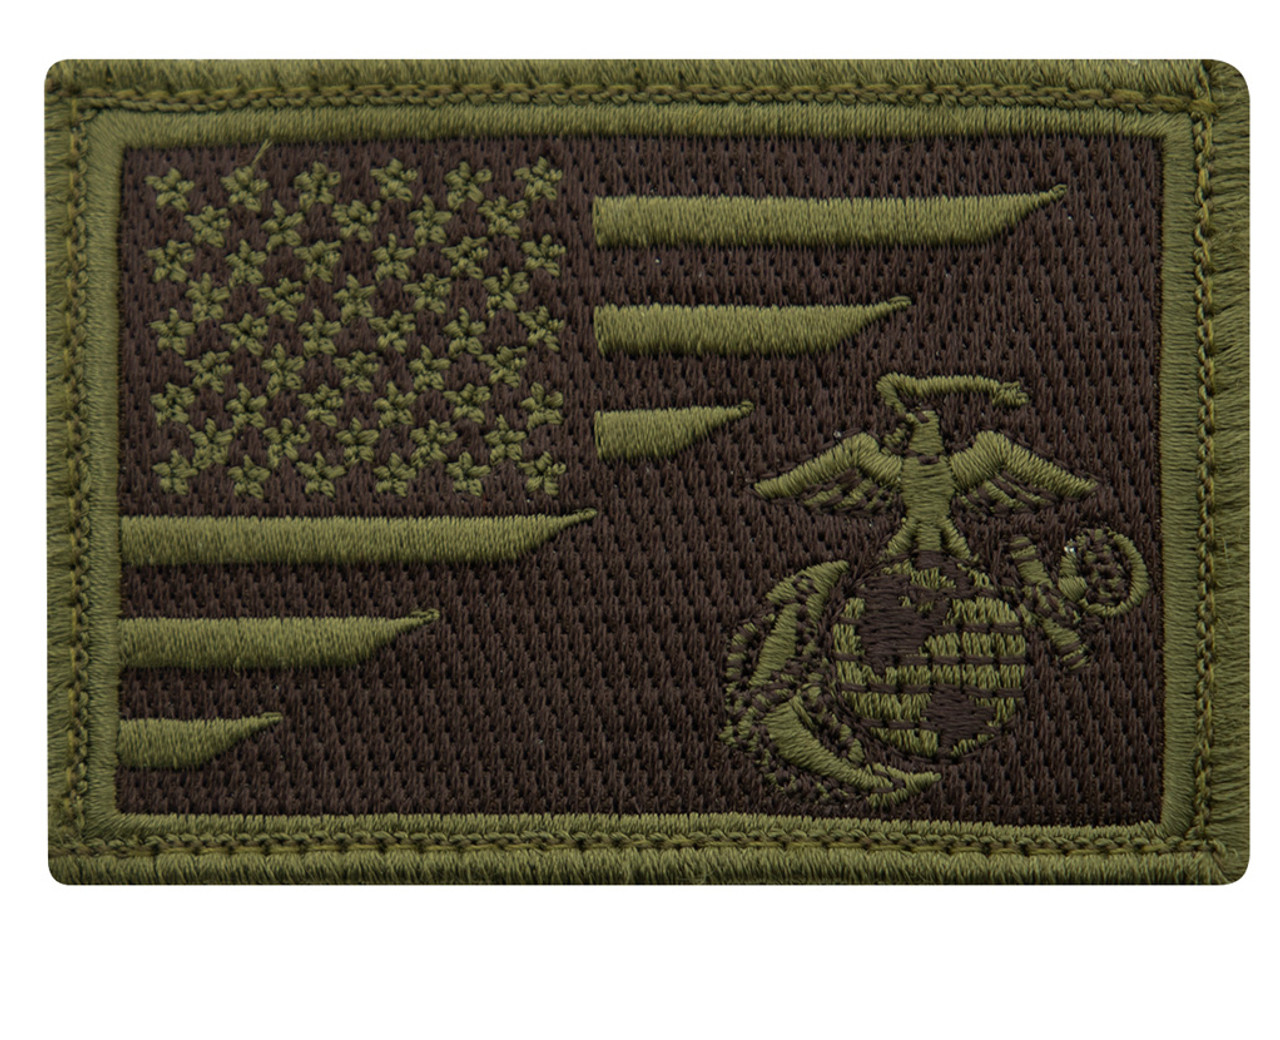 Shop USMC Flag Morale Patches - Fatigues Army Navy